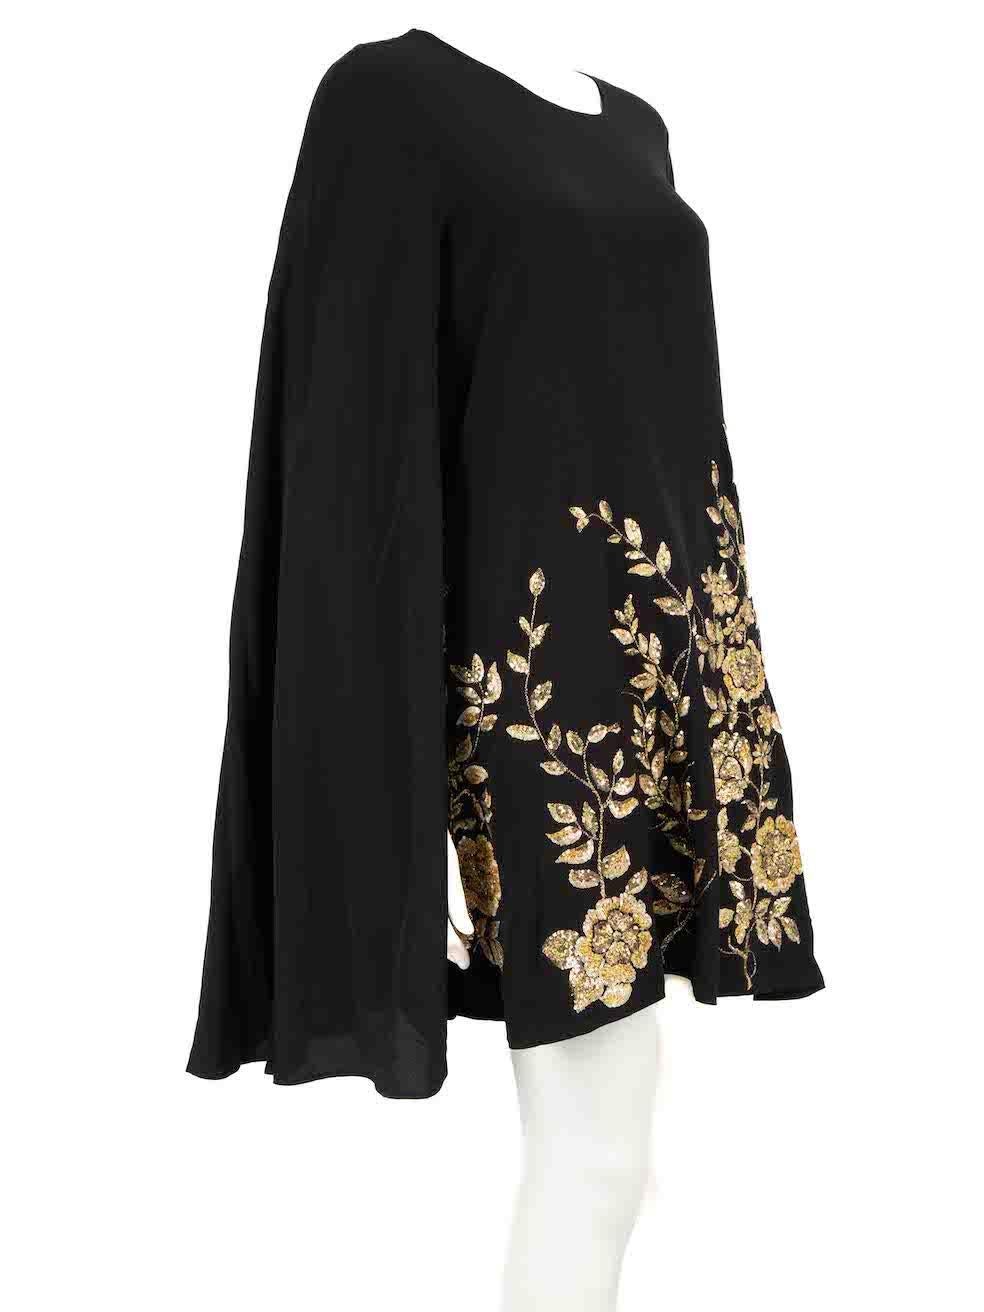 CONDITION is Very good. Minimal wear to dress is evident. Minimal wear to both underarm linings with light marks on this used Etro designer resale item.
 
 
 
 Details
 
 
 Black
 
 Silk
 
 Cape dress
 
 Mini
 
 Gold sequin embellishment
 
 Round